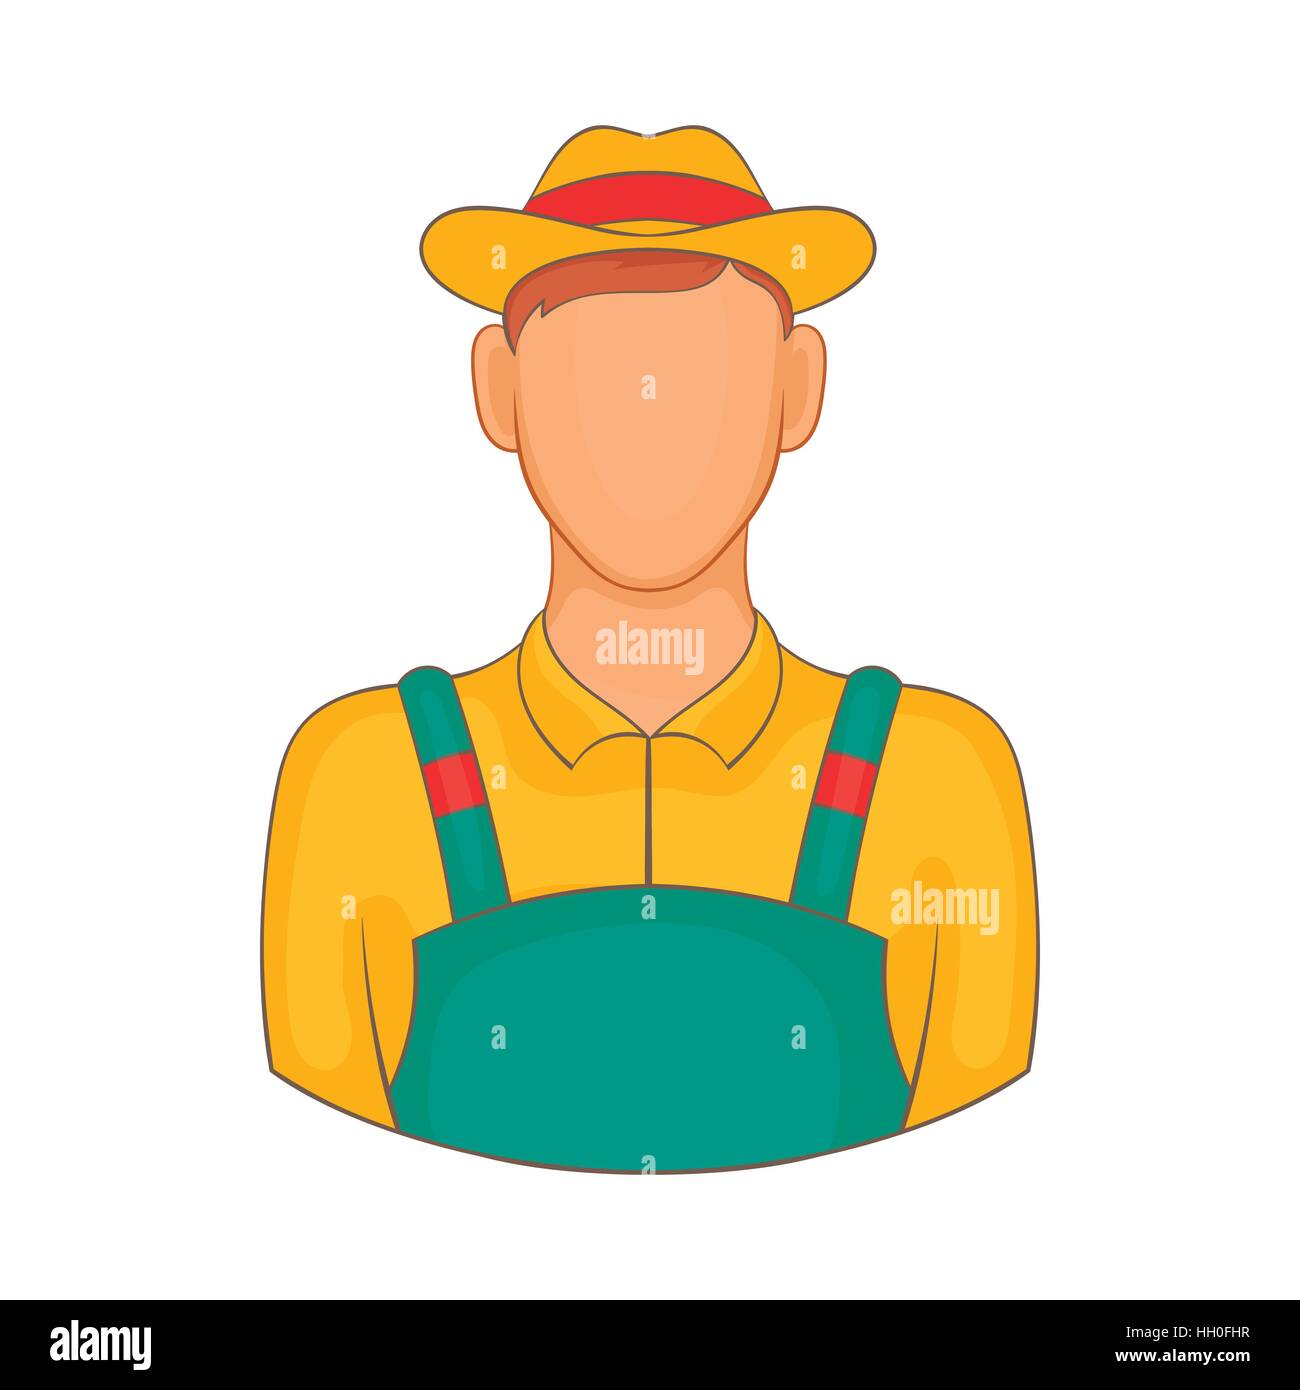 Farmer Cartoon High Resolution Stock Photography and Images - Alamy